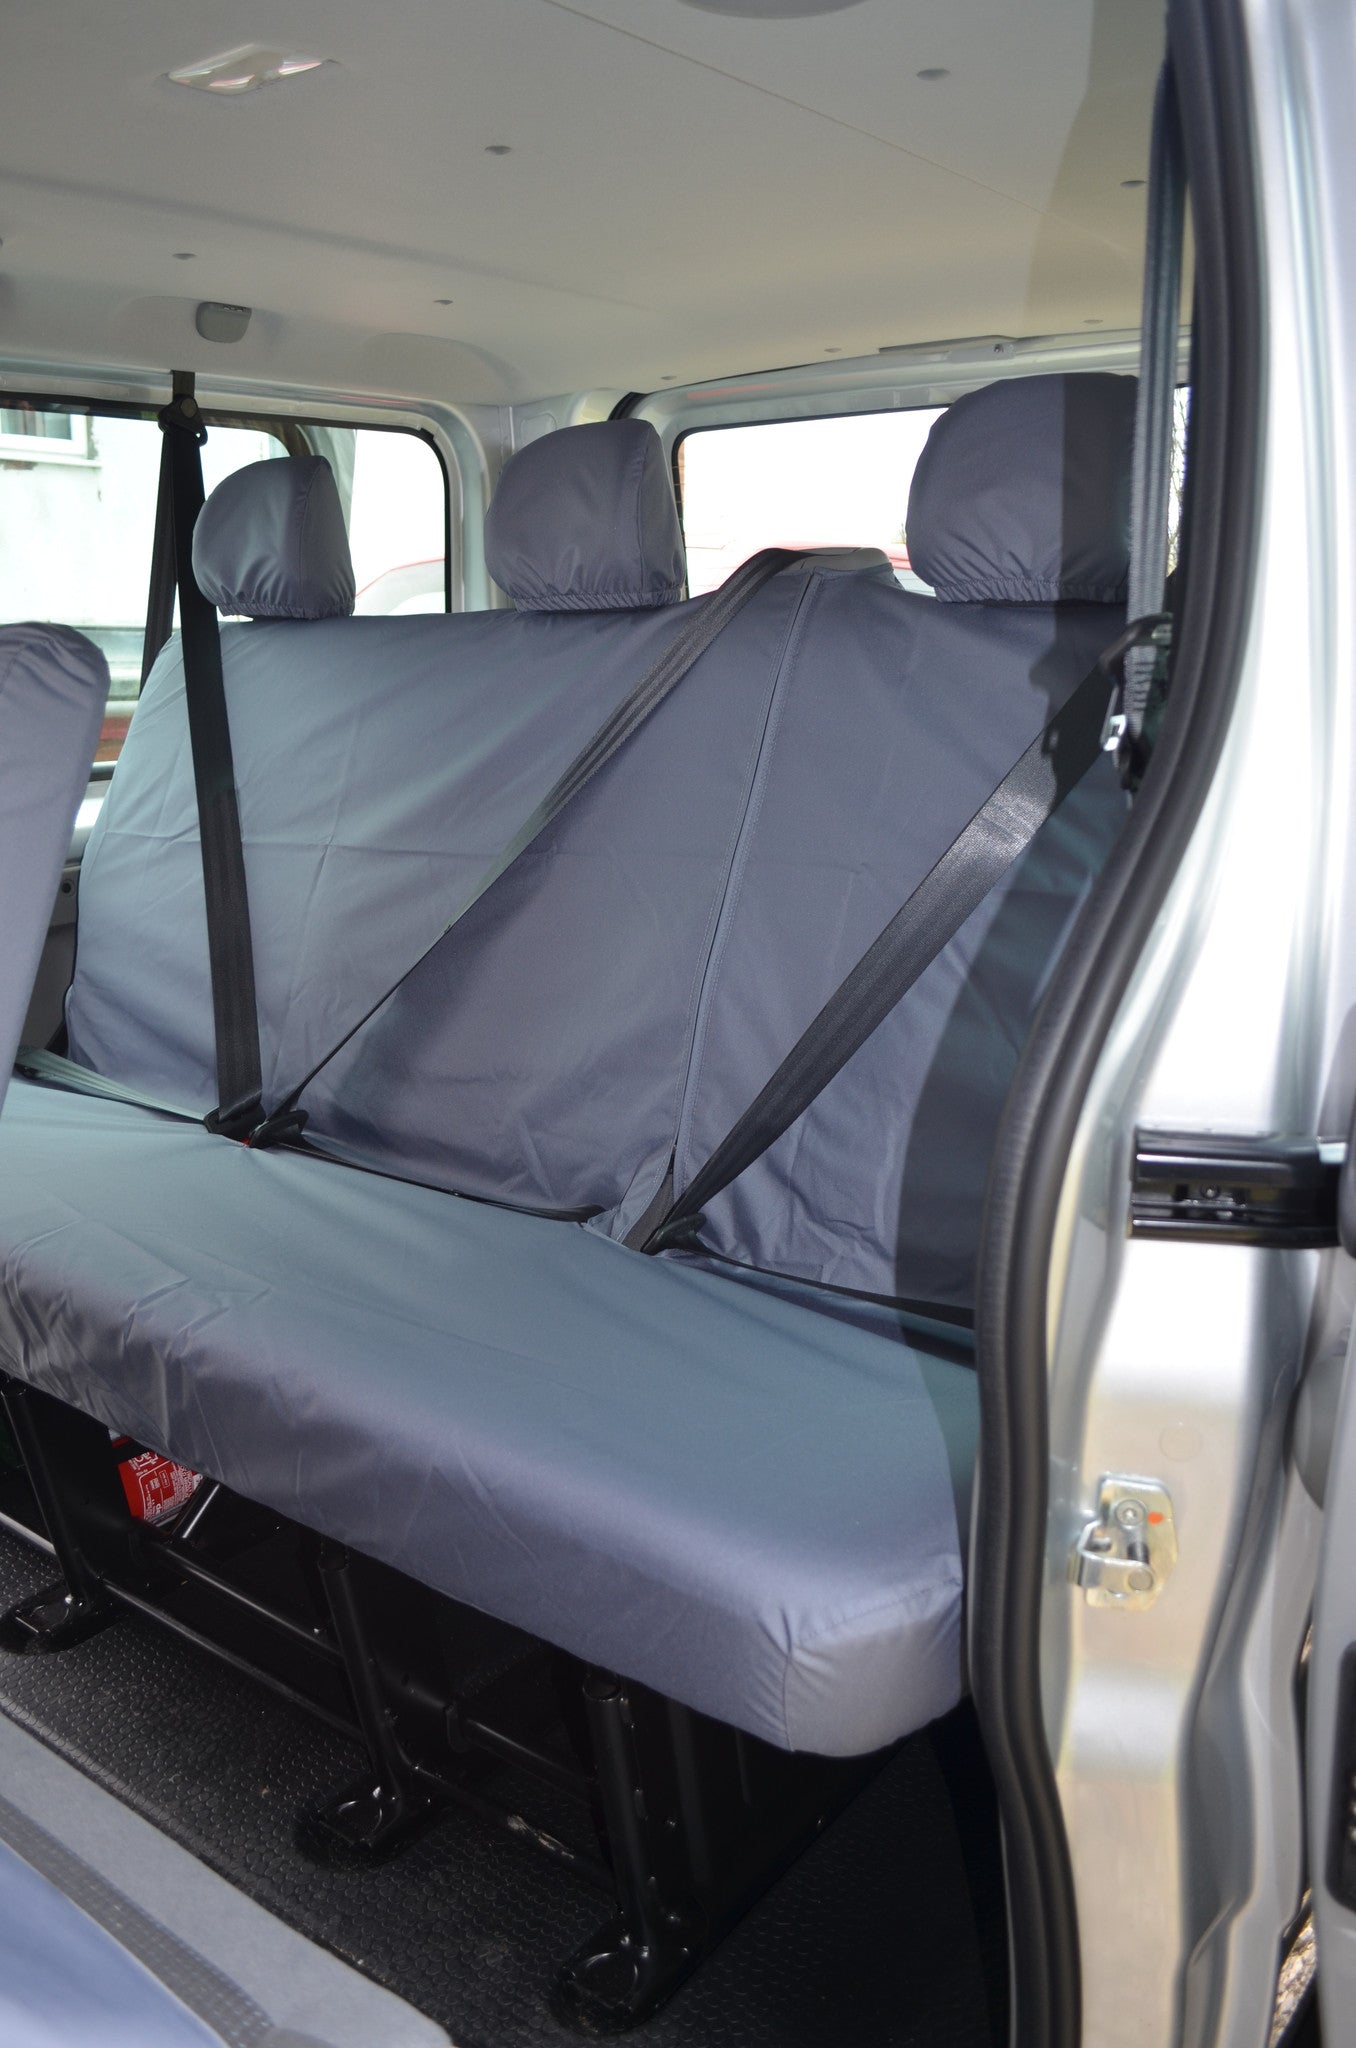 Renault Trafic Passenger 2006 - 2014 Seat Covers Grey / 3rd Row Bench Turtle Covers Ltd